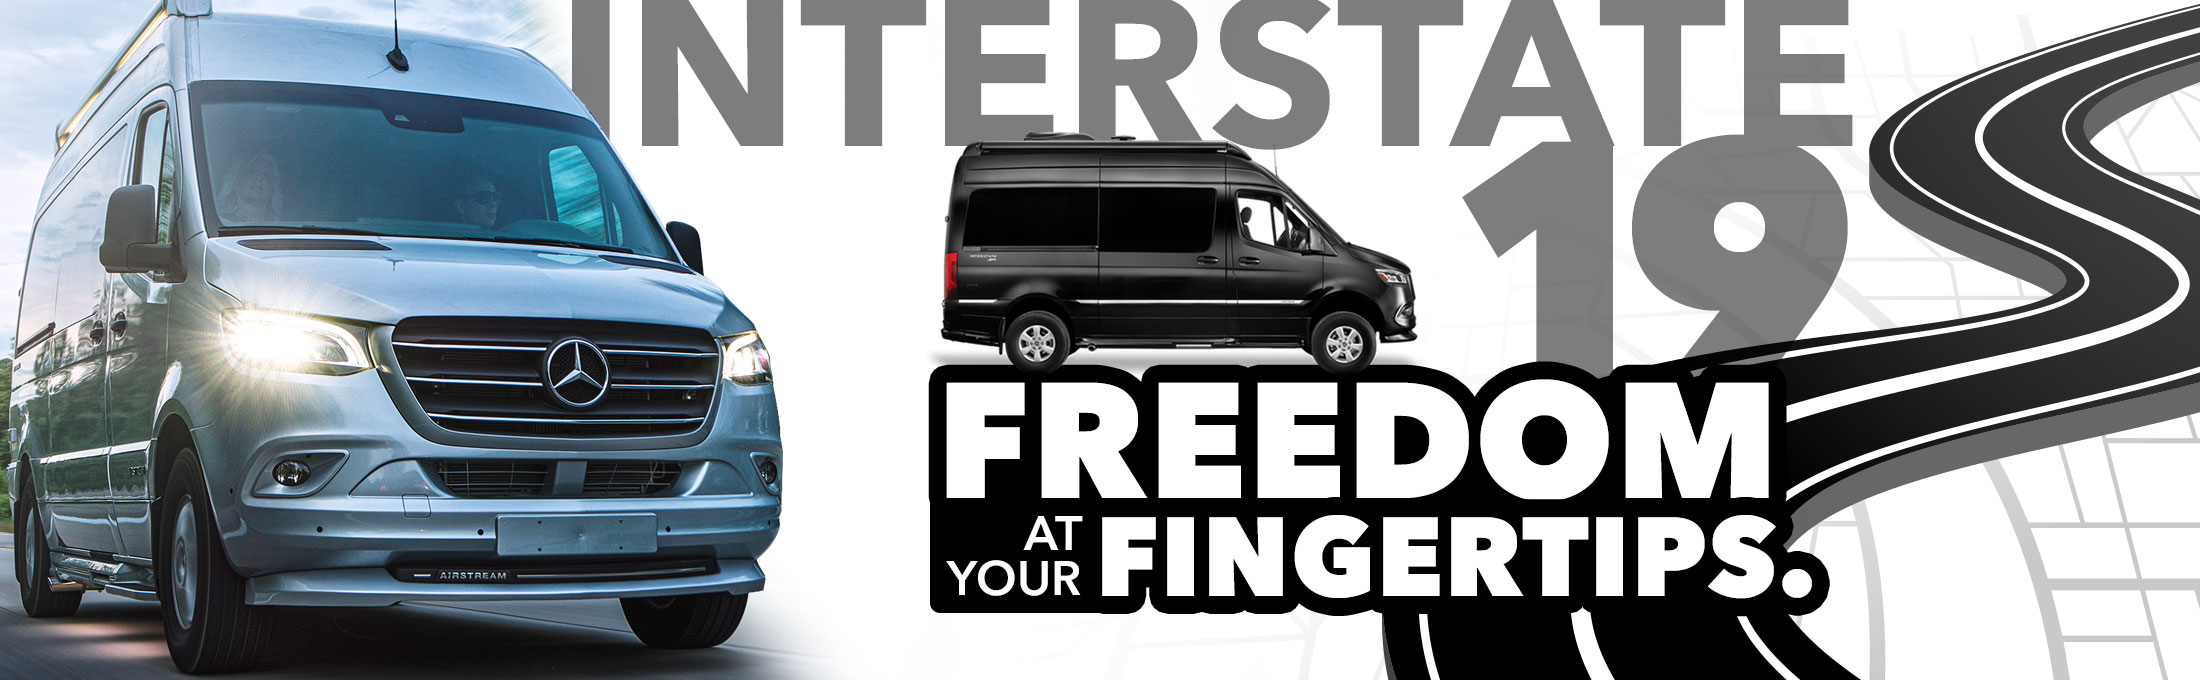 Airstream Interstate 19: Freedom At Your Fingertips.